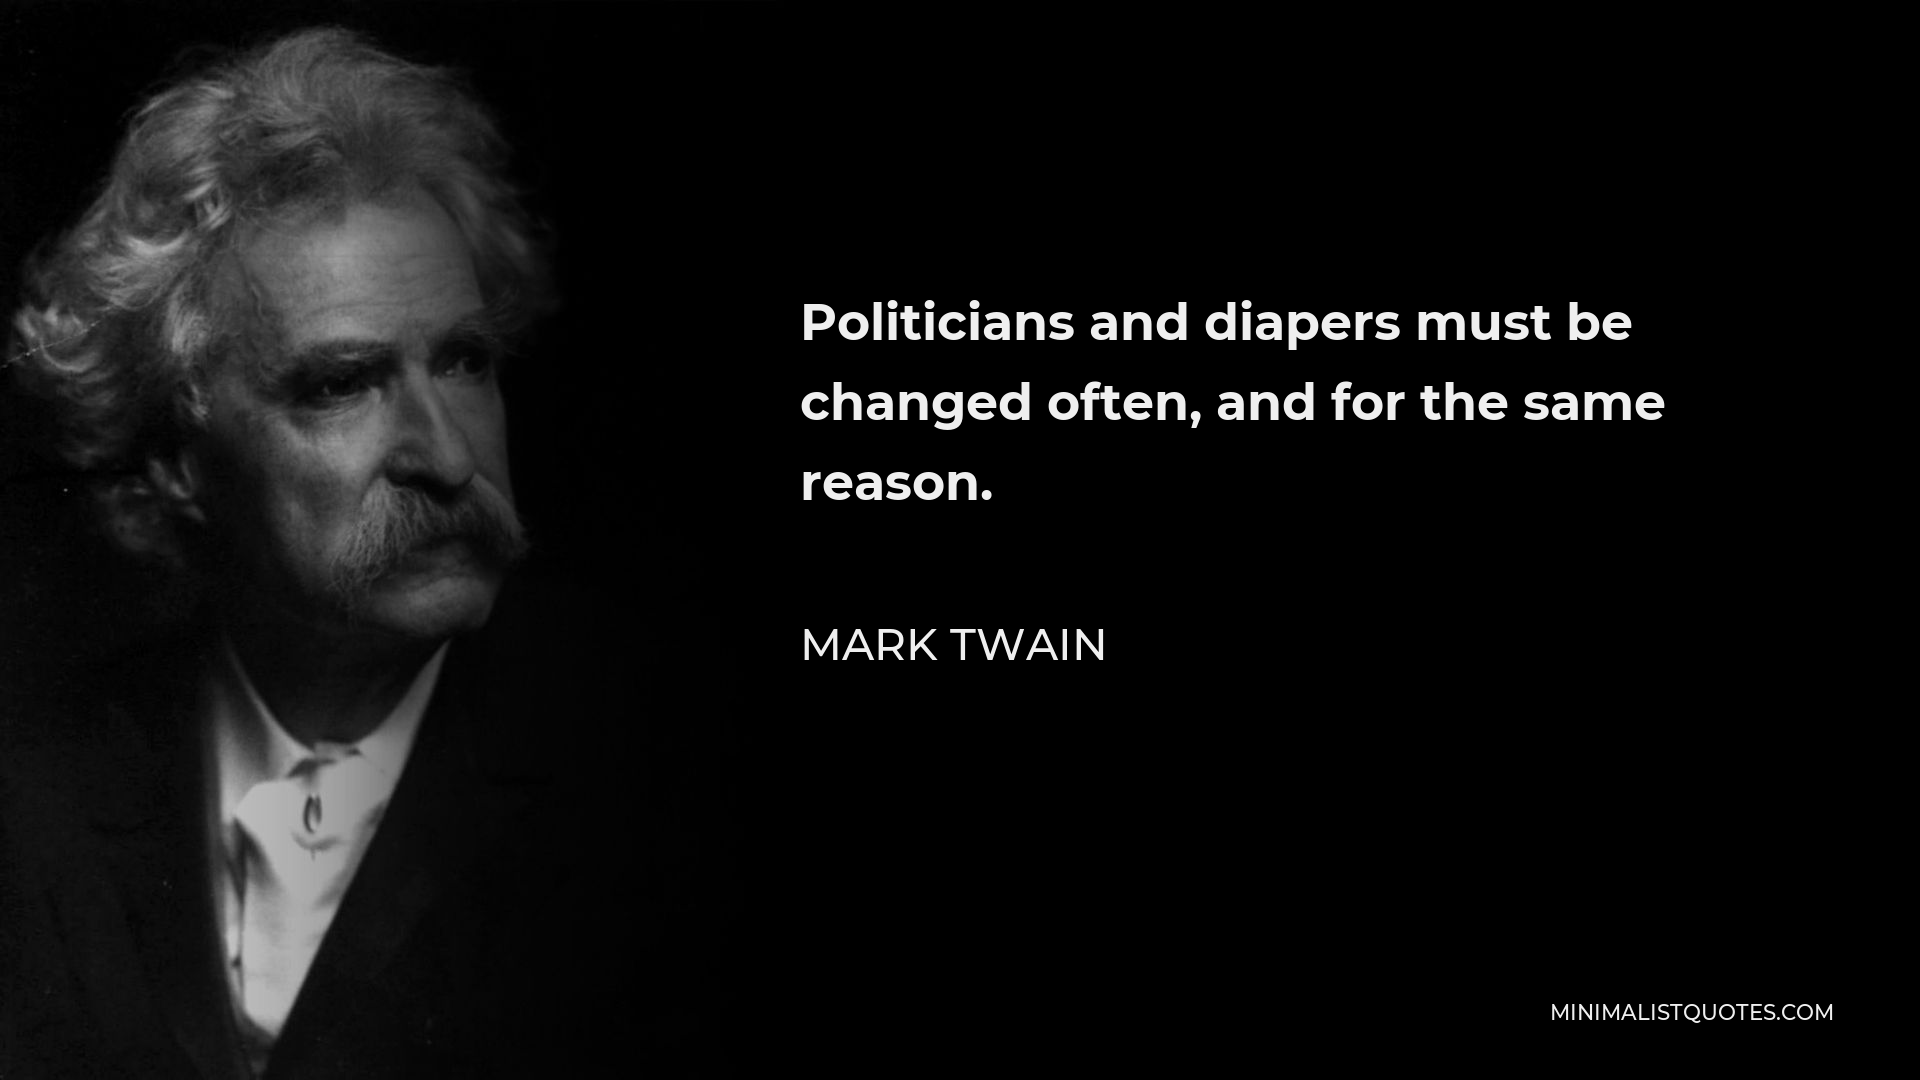 Mark Twain Quote - Politicians and diapers must be changed often, and for the same reason.